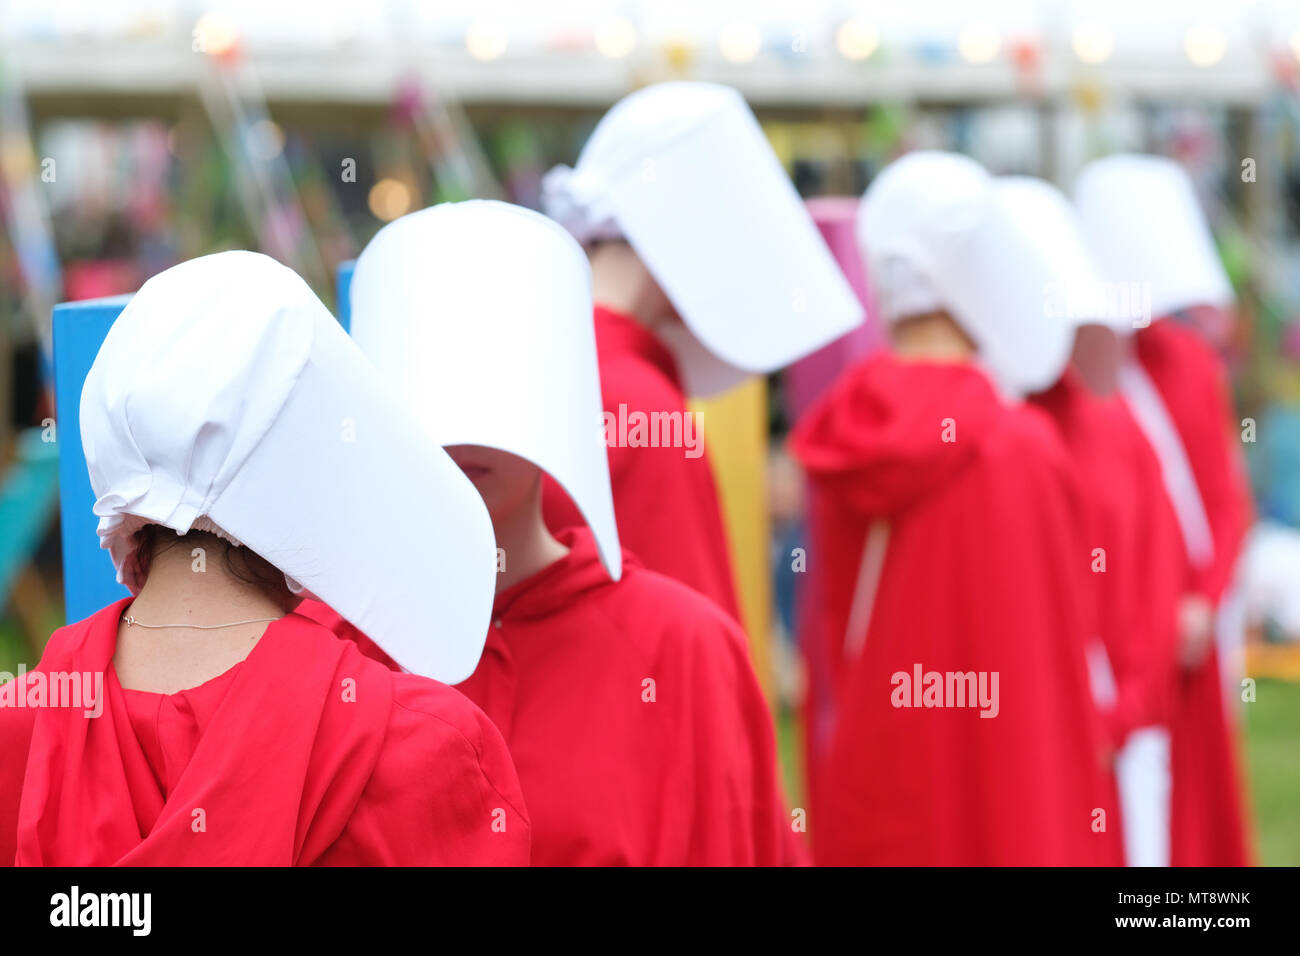 Hay Festival, Hay on Wye, UK - Monday 28th May 2018 - Handmaids at Hay - Handmaids arrive to escort author Margaret Atwood to the stage at the Hay Festival to discuss The Handmaids Tale  - Photo Steven May / Alamy Live News Stock Photo